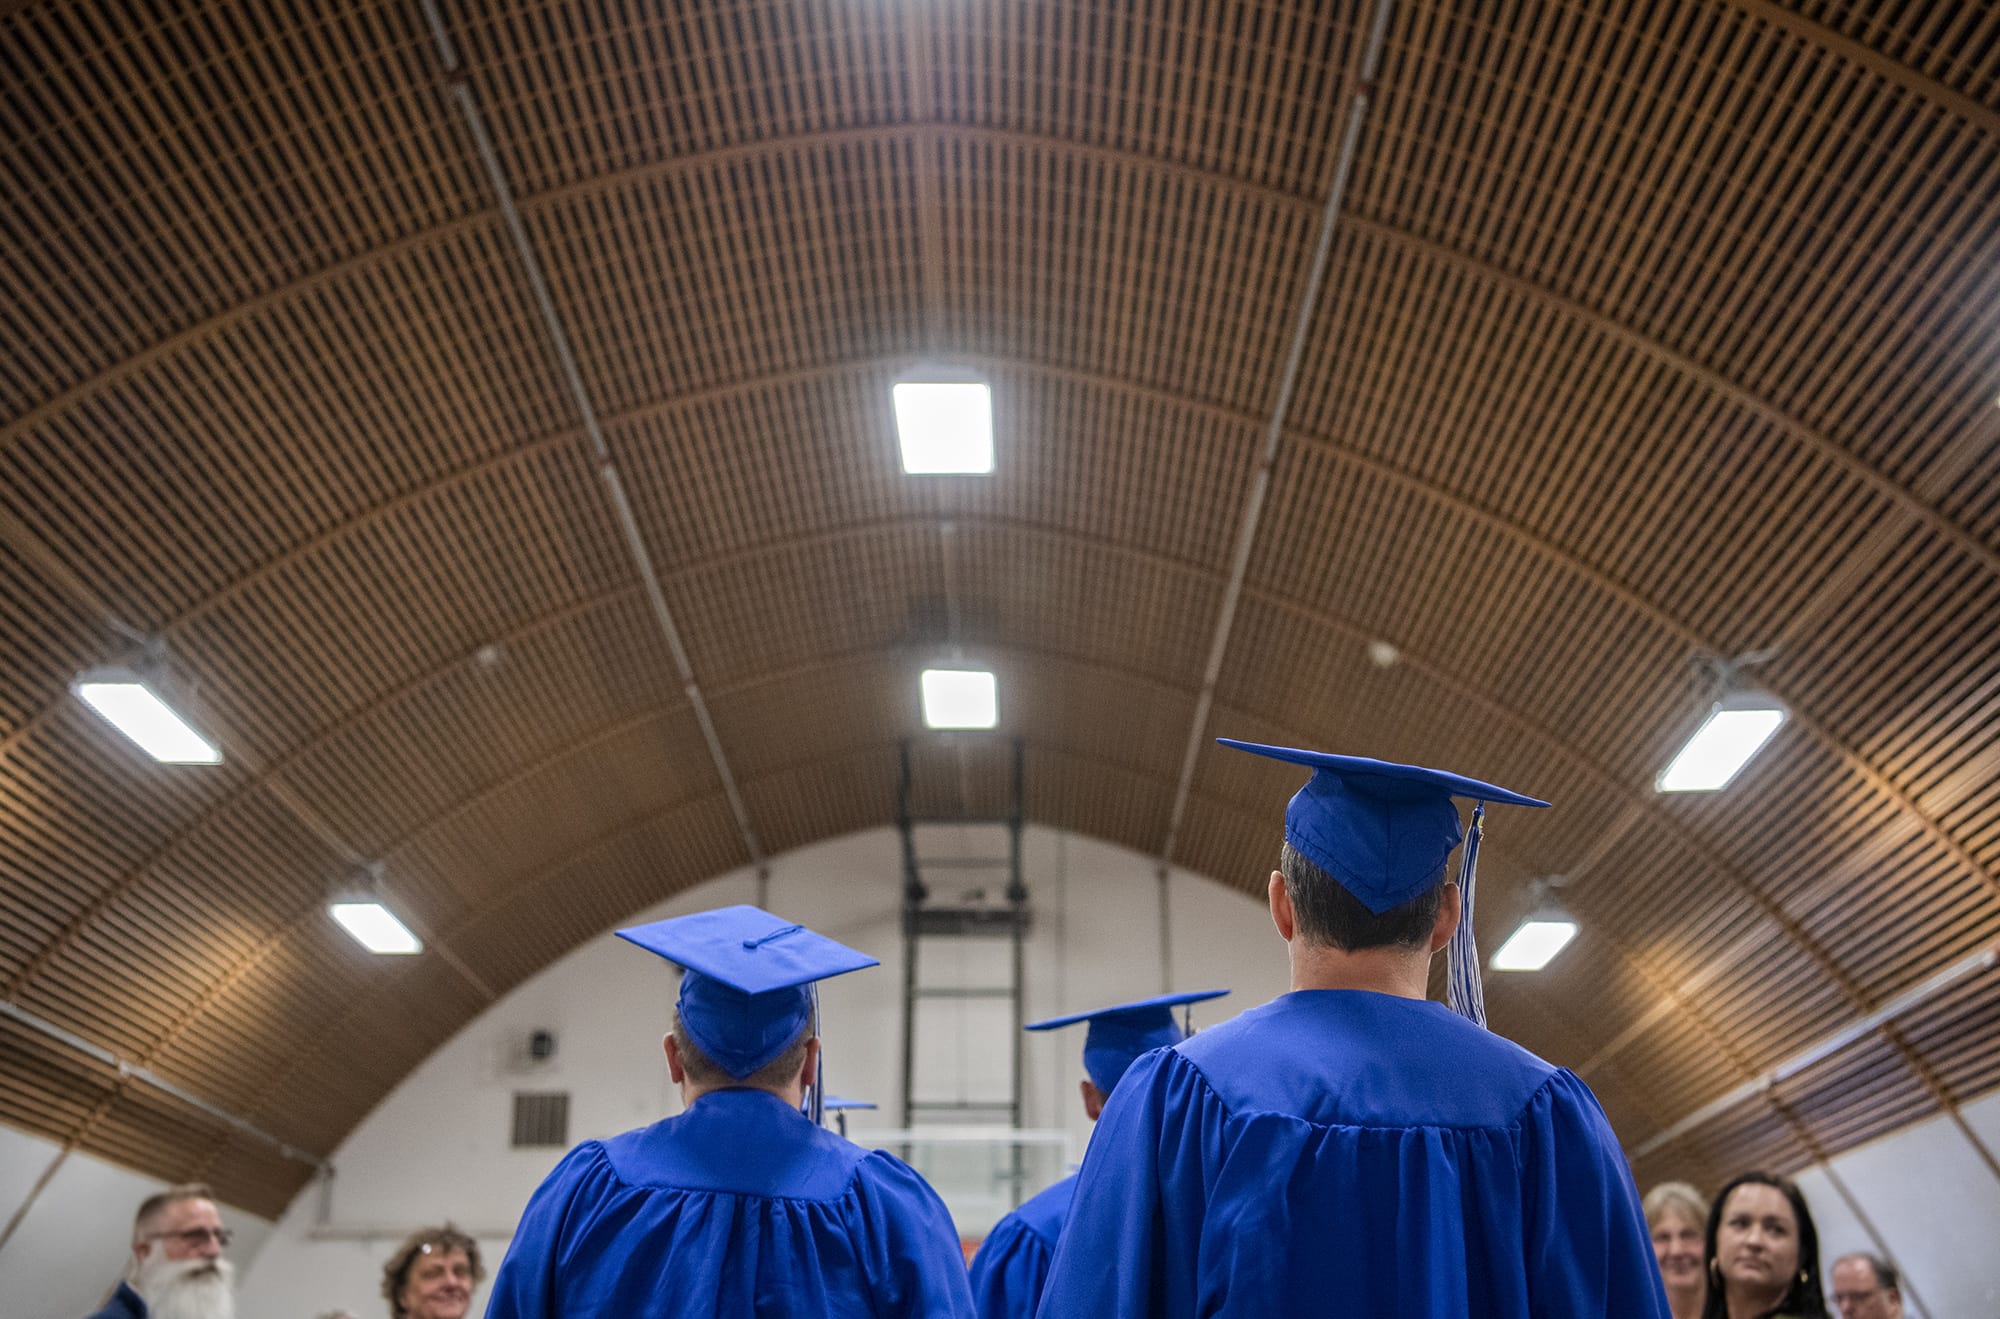 Graduates walk through the gymnasium during the commencement ceremony for Clark College graduates at Larch Corrections Center in Yacolt on Wednesday, June 19, 2019. About 100 men walked in the graduation ceremony with recently completed General Educational Development certificates, and college programs in automotive and maintenance service, business and supervisory management. More than 20 men also revived honors on the Clark College honor roll.